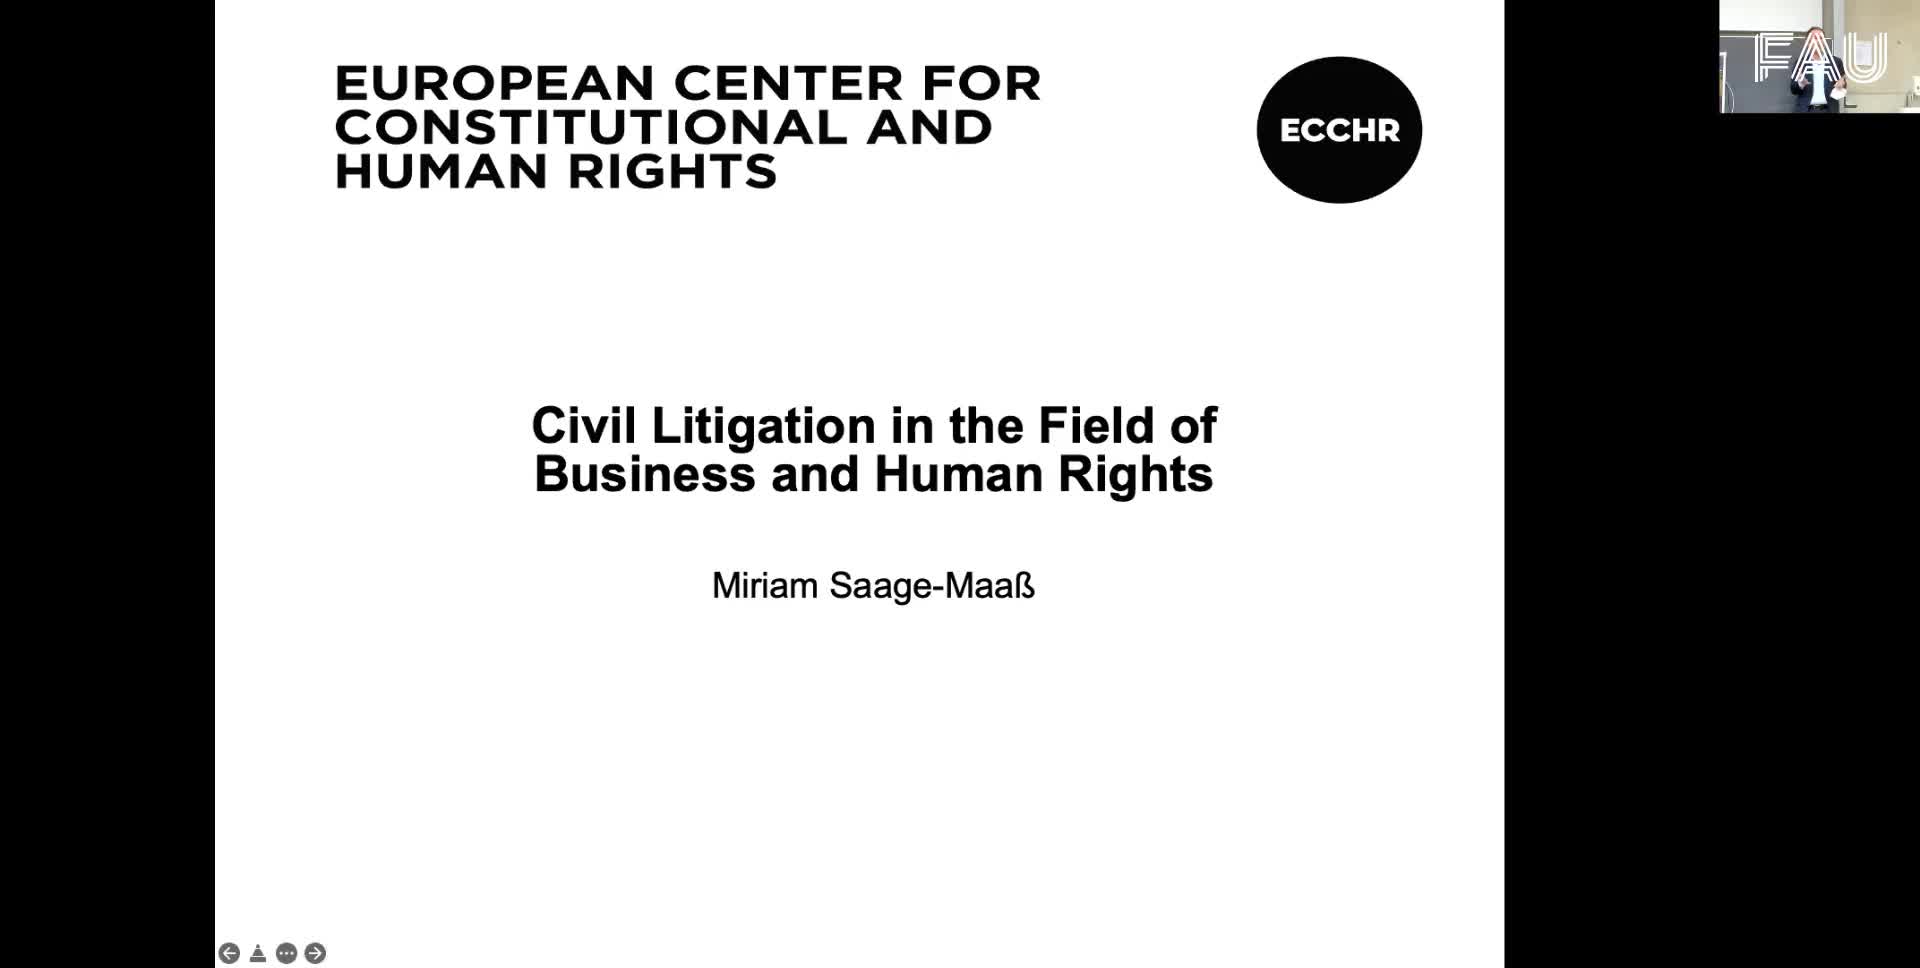 Miriam Saage-Maaß: "Civil Litigation in the Field of Business and Human Rights" preview image